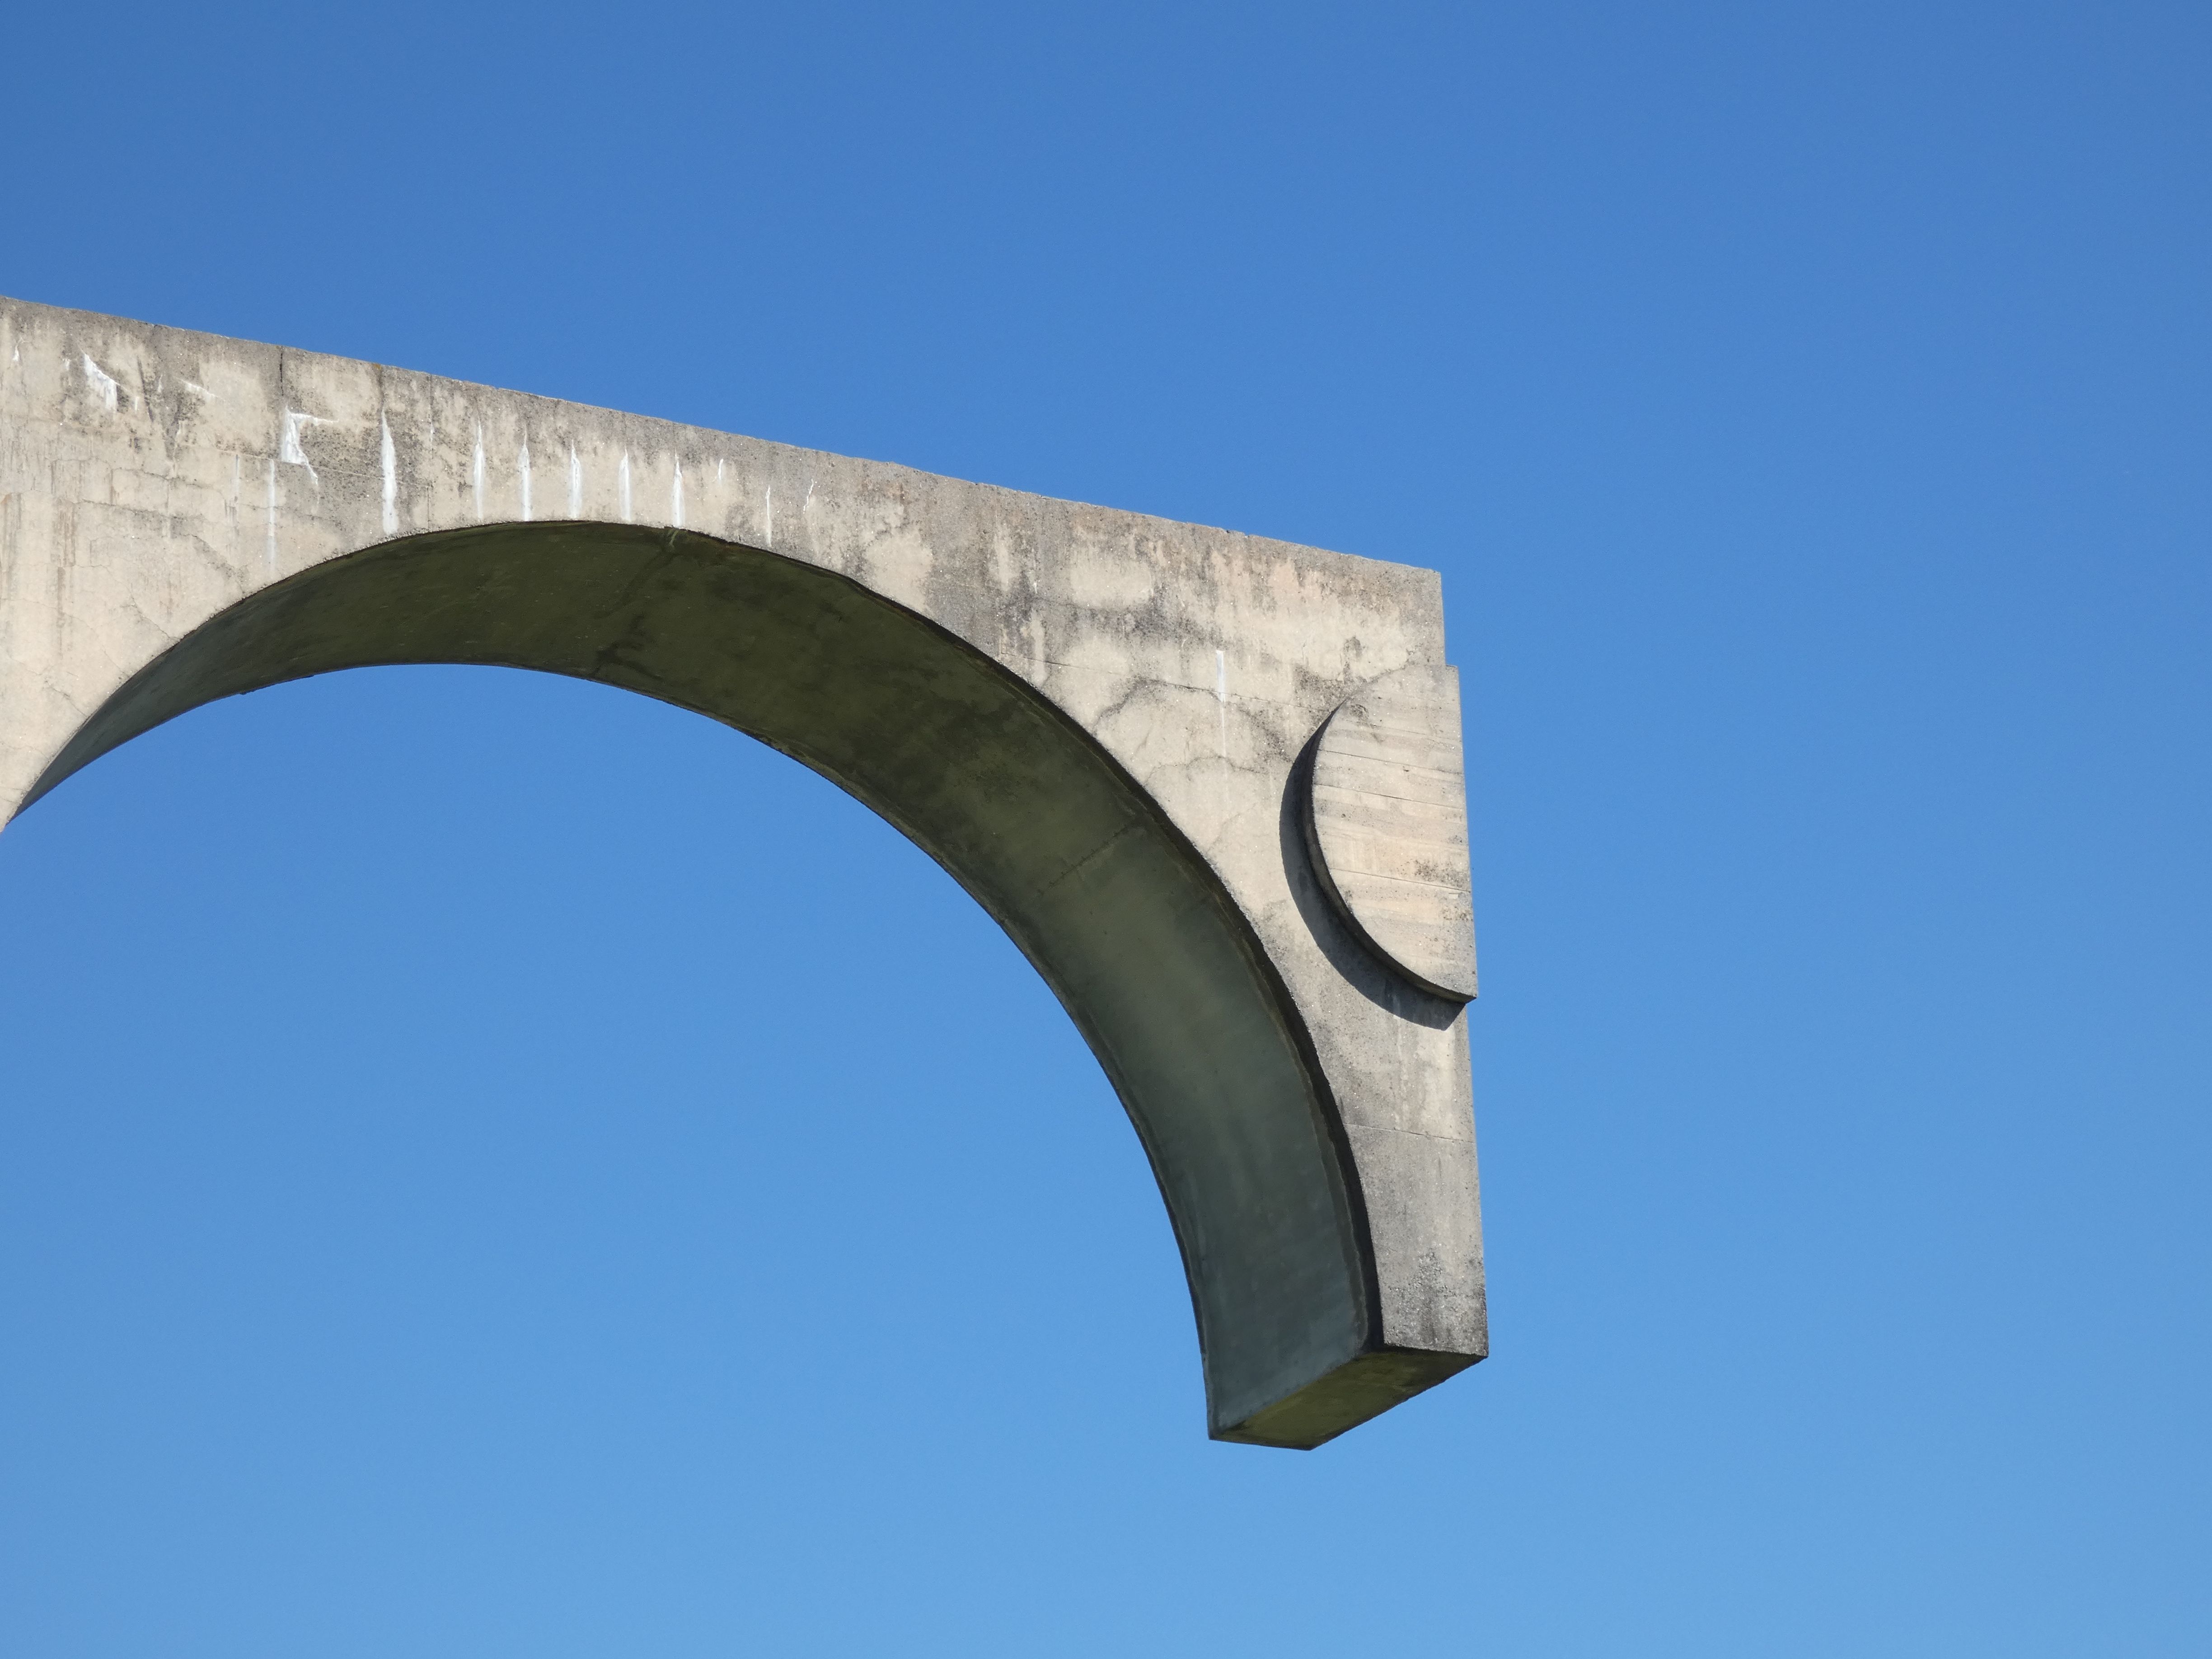 side of a monument called "Perpetual Movement", located in Braga, Portugal